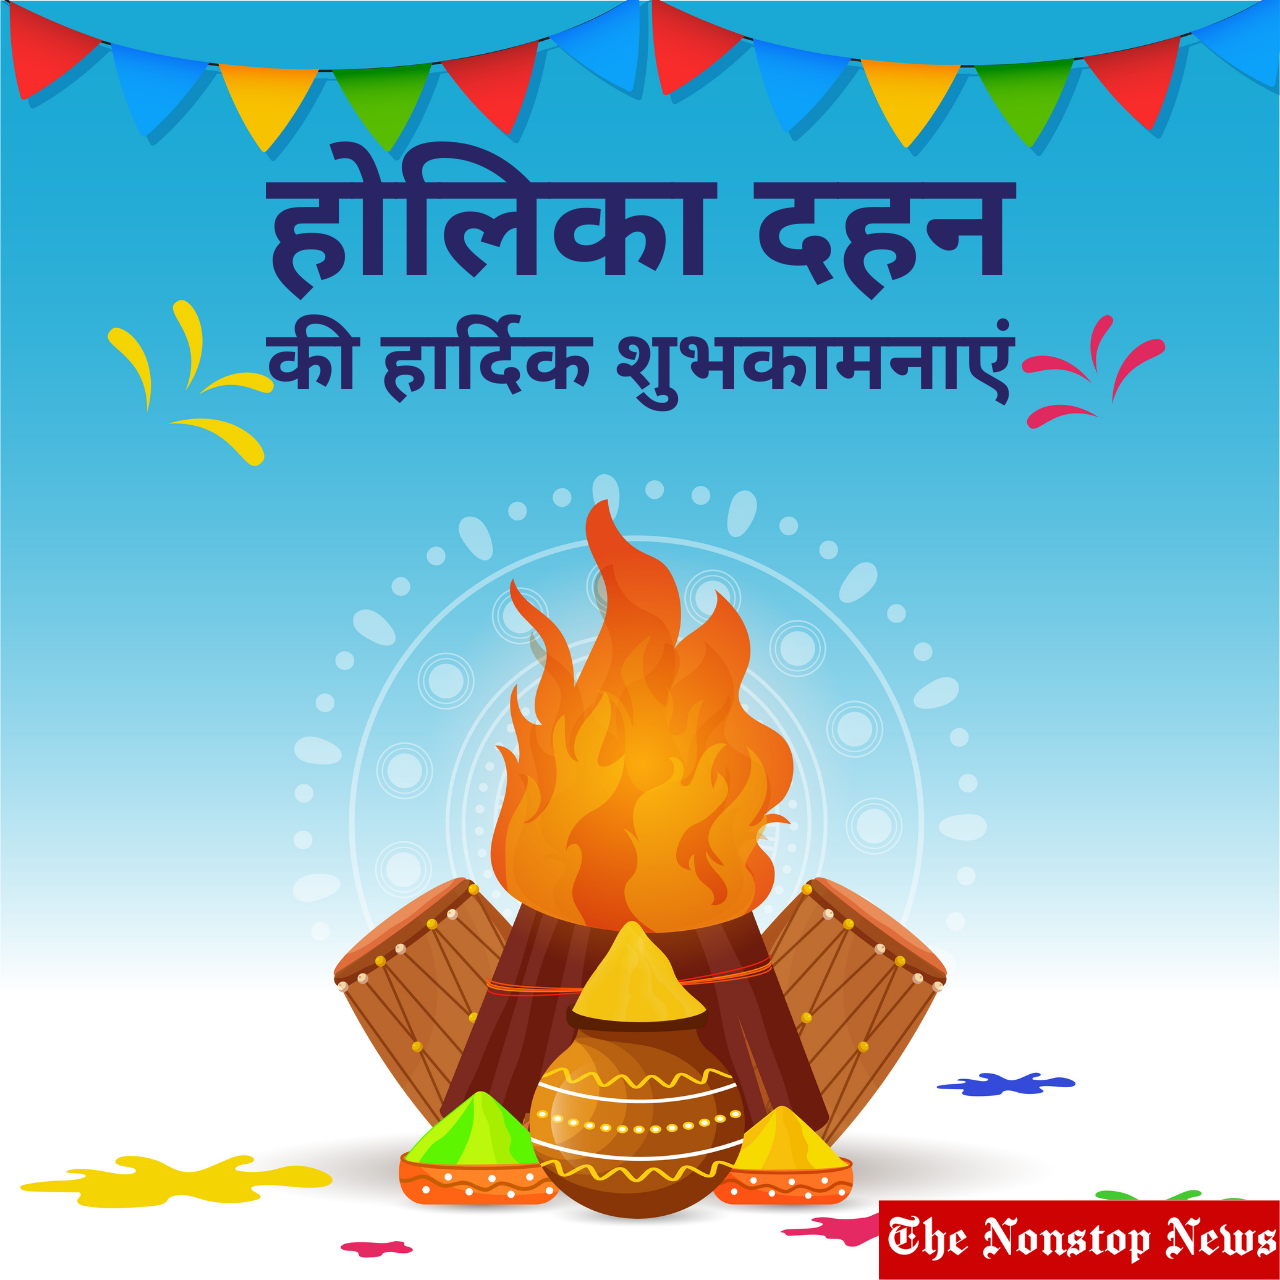 Happy Holika Dahan 2021 Wishes in Hindi, Greetings, Messages, Images ...